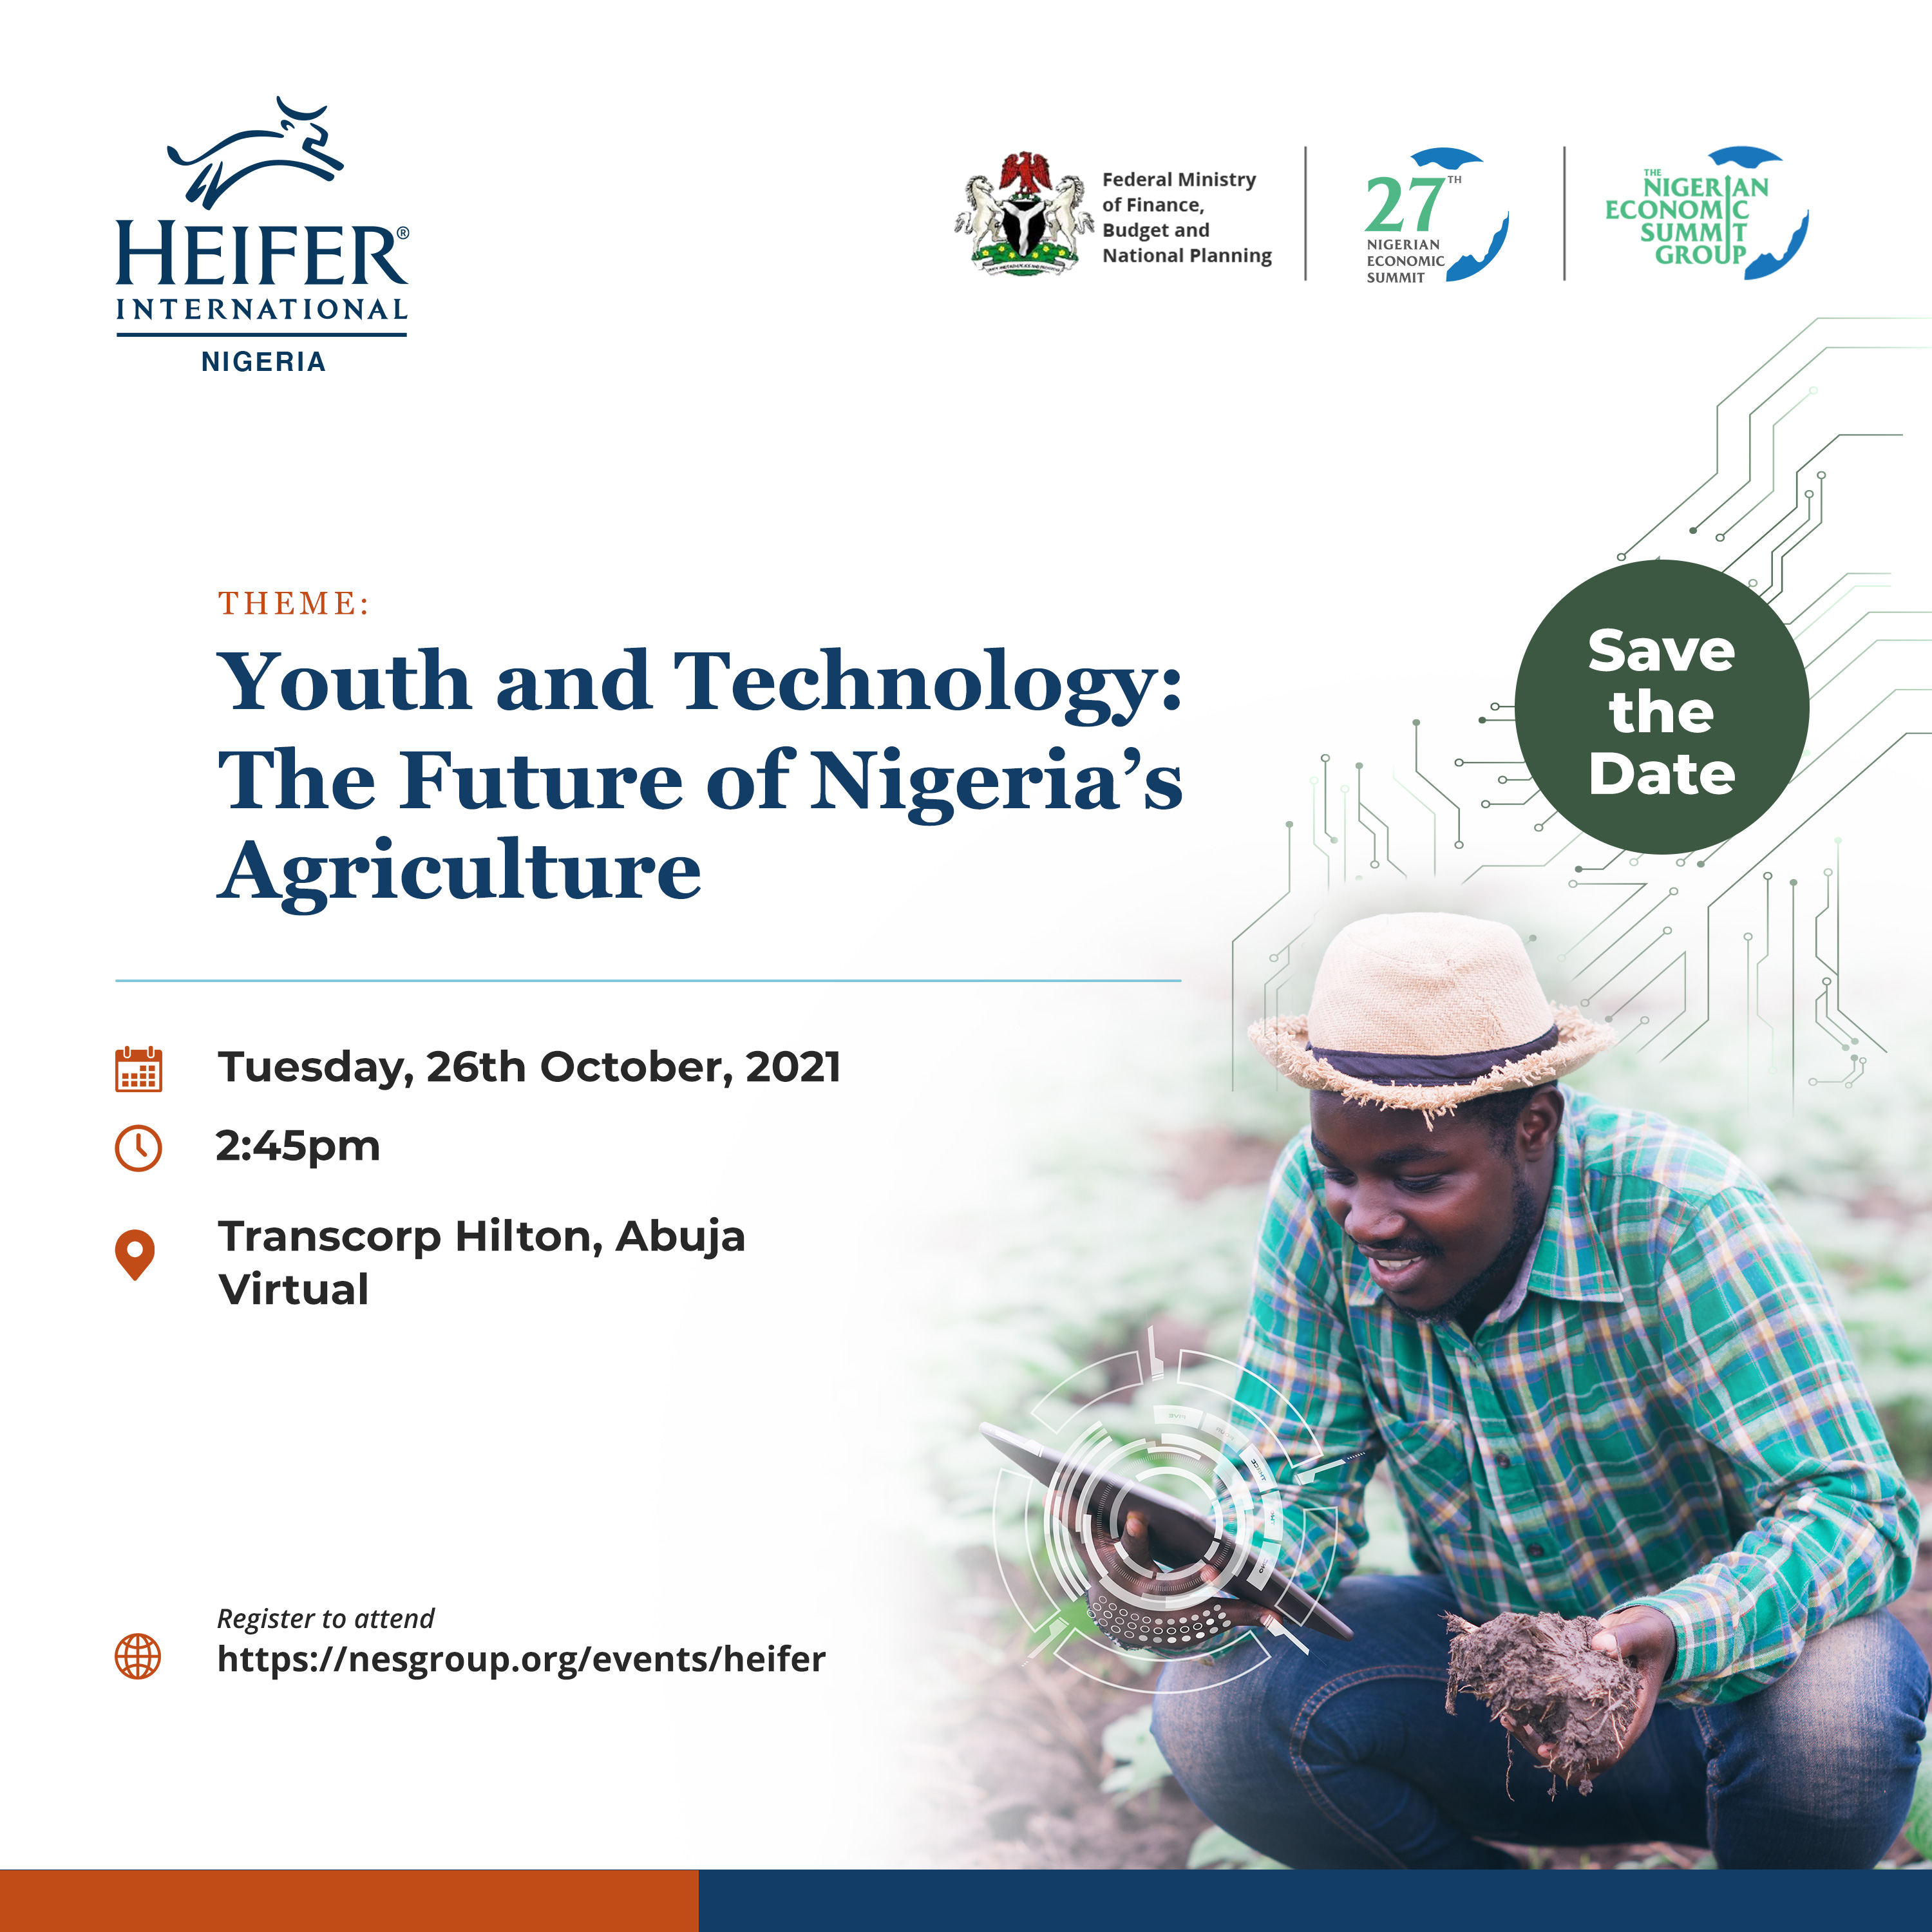 Youth and Technology: The Future of Nigeria's Agriculture, The Nigerian Economic Summit Group, The NESG, think-tank, think, tank, nigeria, policy, nesg, africa, number one think in africa, best think in nigeria, the best think tank in africa, top 10 think tanks in nigeria, think tank nigeria, economy, business, PPD, public, private, dialogue, Nigeria, Nigeria PPD, NIGERIA, PPD